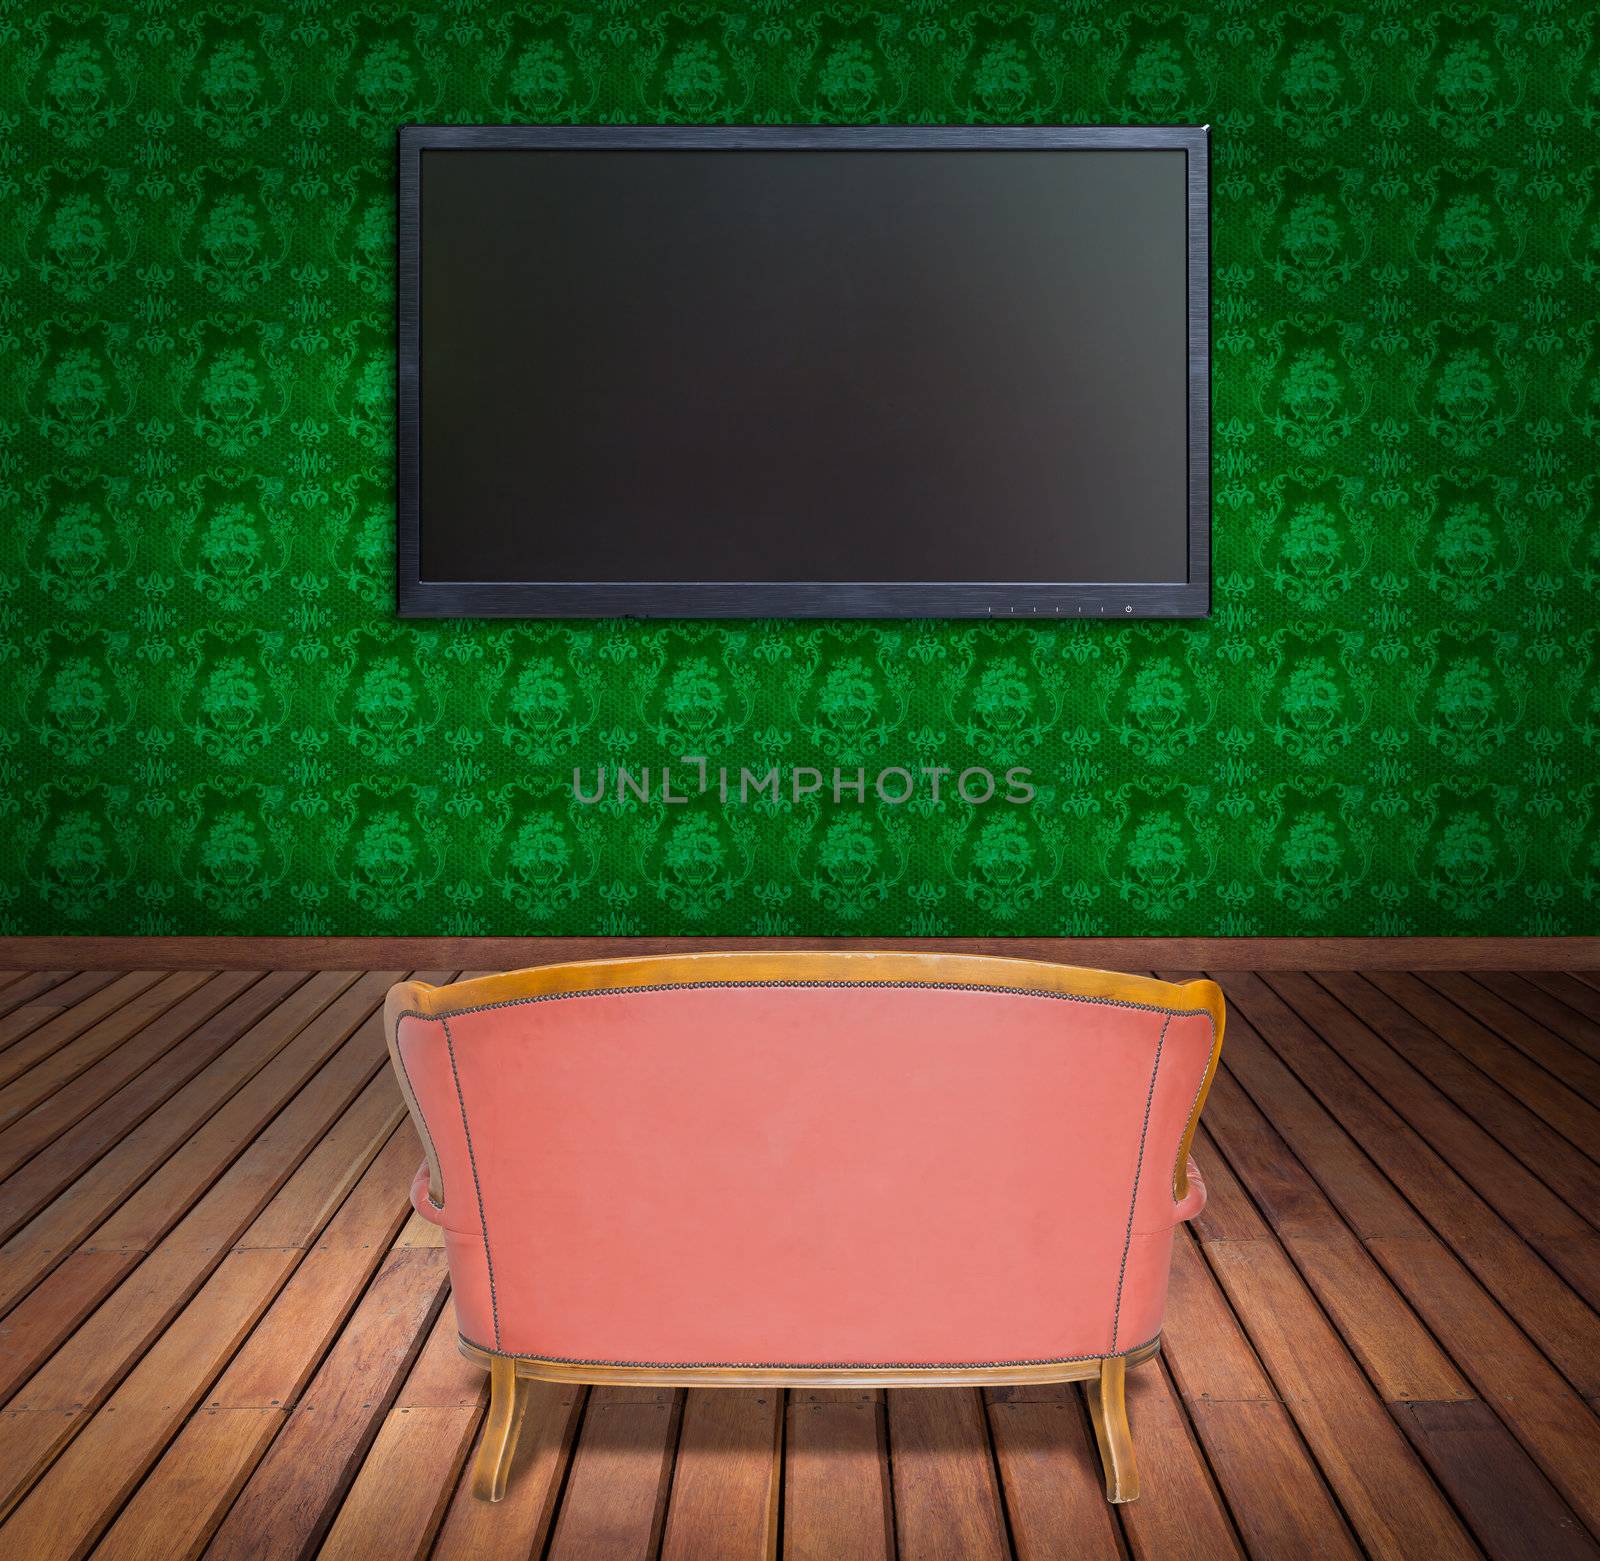 television and sofa in green wallpaper room by tungphoto